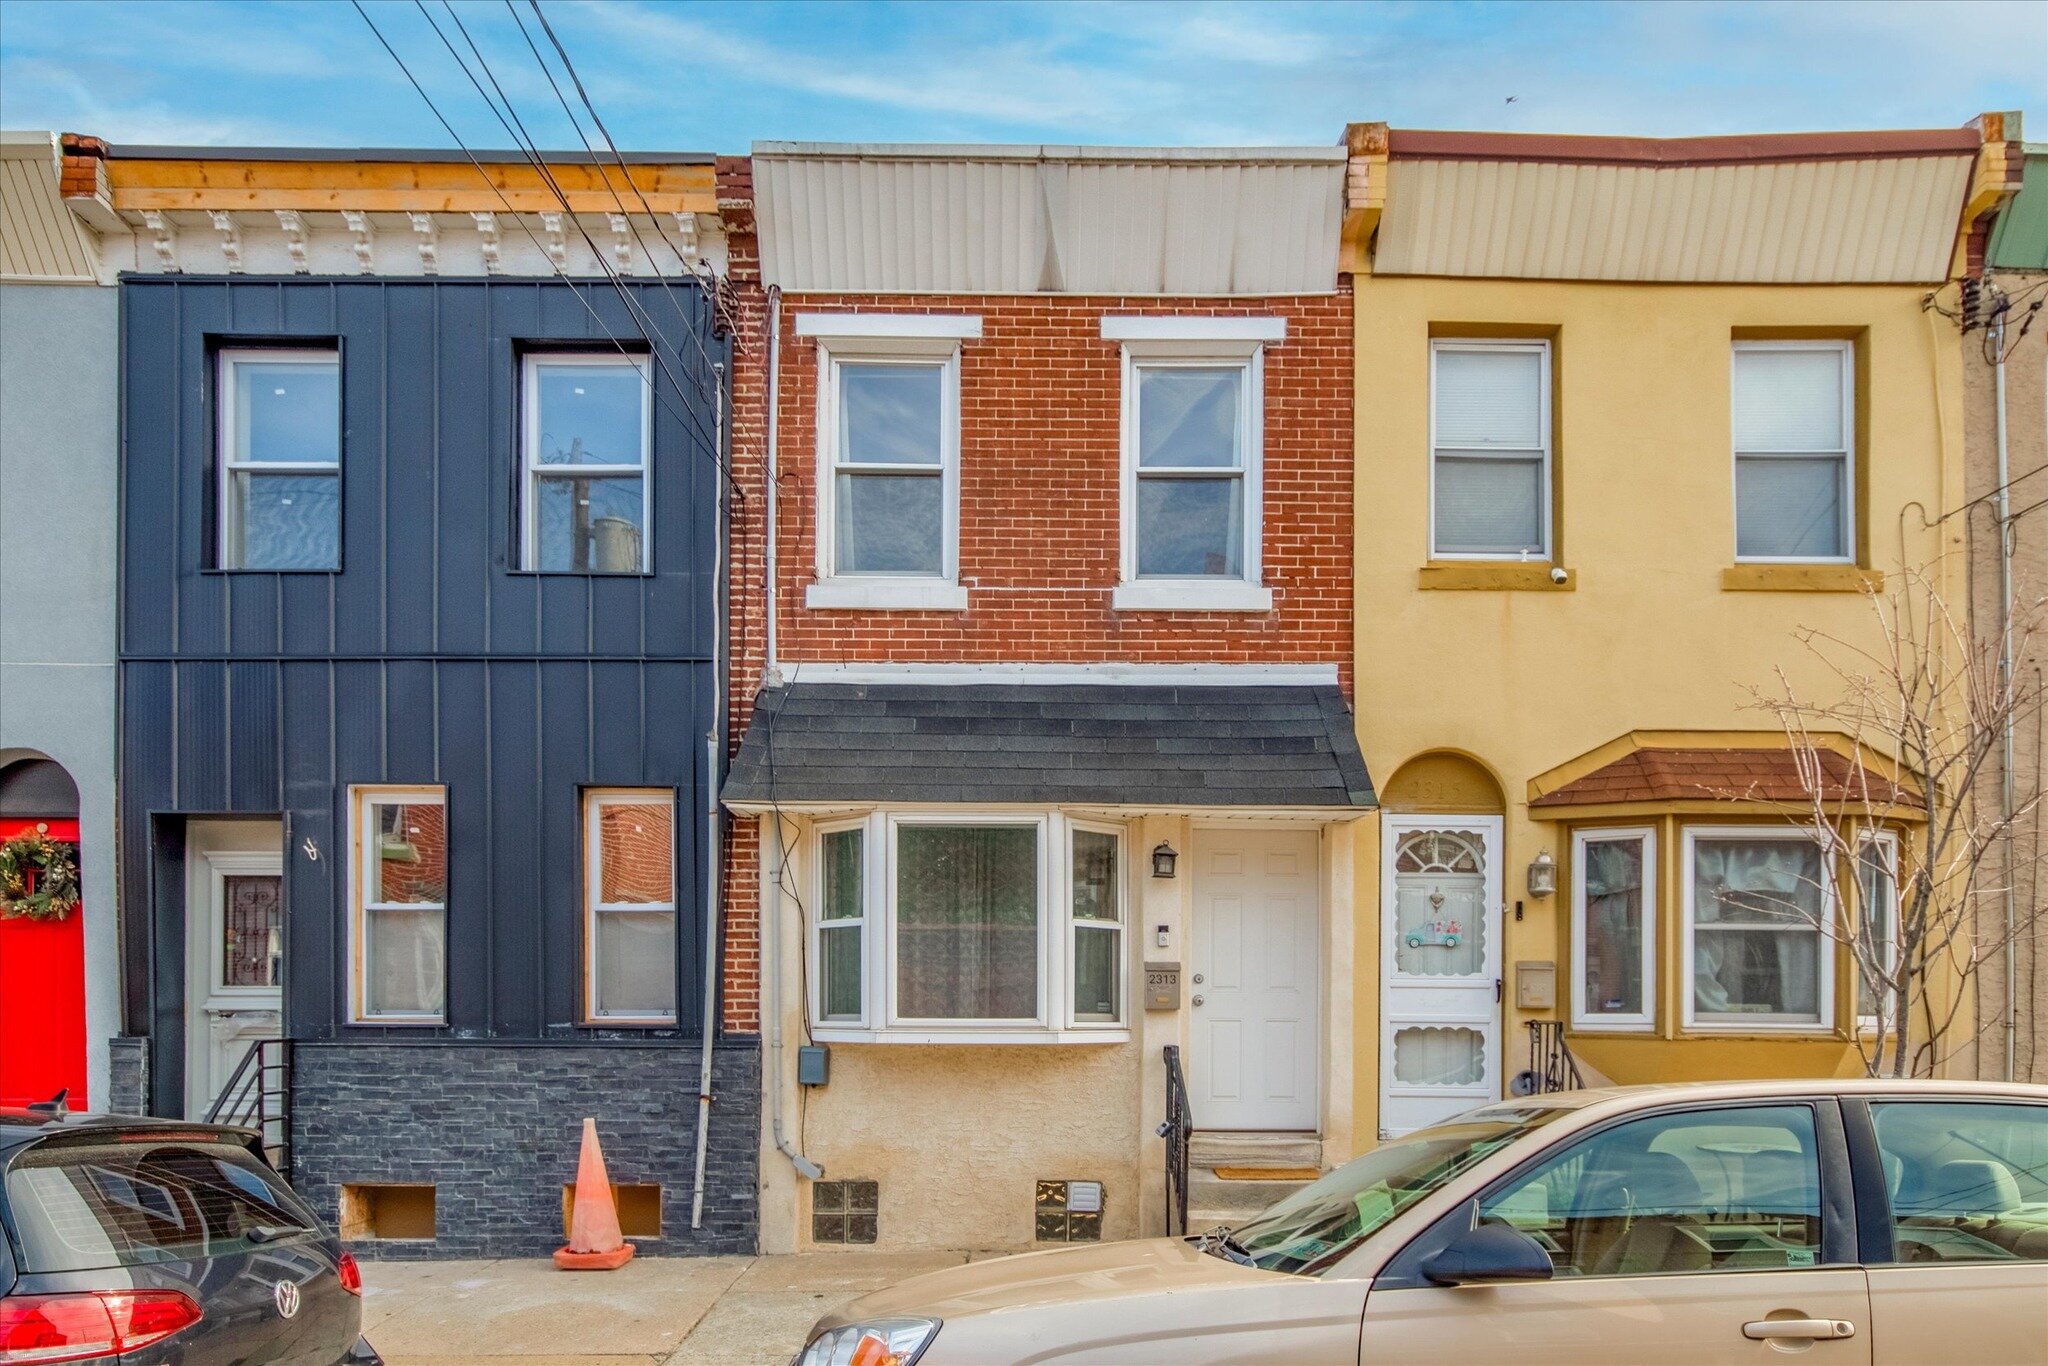 NEW TO MARKET!✨

Charming Row Home in Fishtown! 🏡 Well-loved and cared for, this 2BD/1BA home boasts character and charm throughout. Upon entering, you will immediately notice the stunning brick accent wall and original hardwood floors. The large li